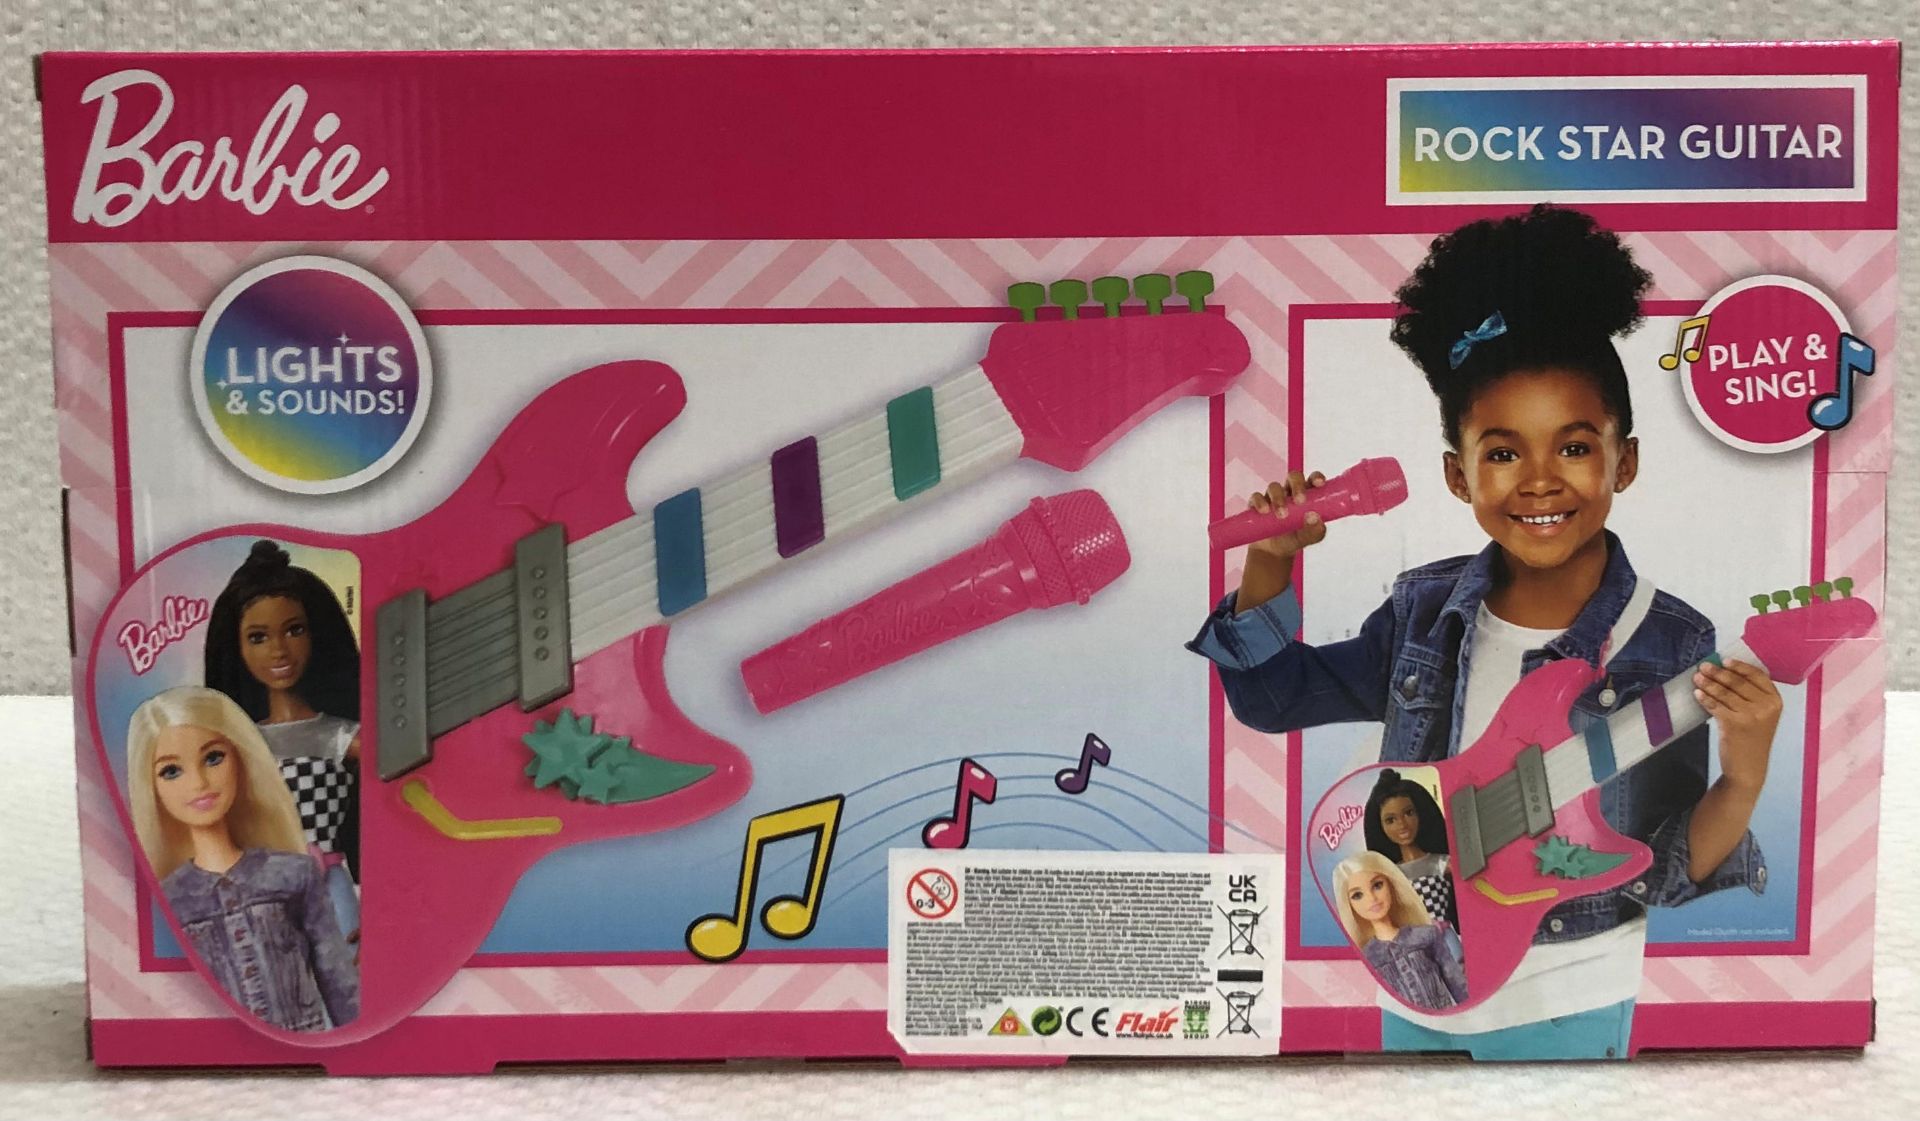 1 x Barbie Rock Star Guitar - New/Boxed - HTYS306 - CL987 - Location: Altrincham WA14 - RRP: £ - Image 5 of 6